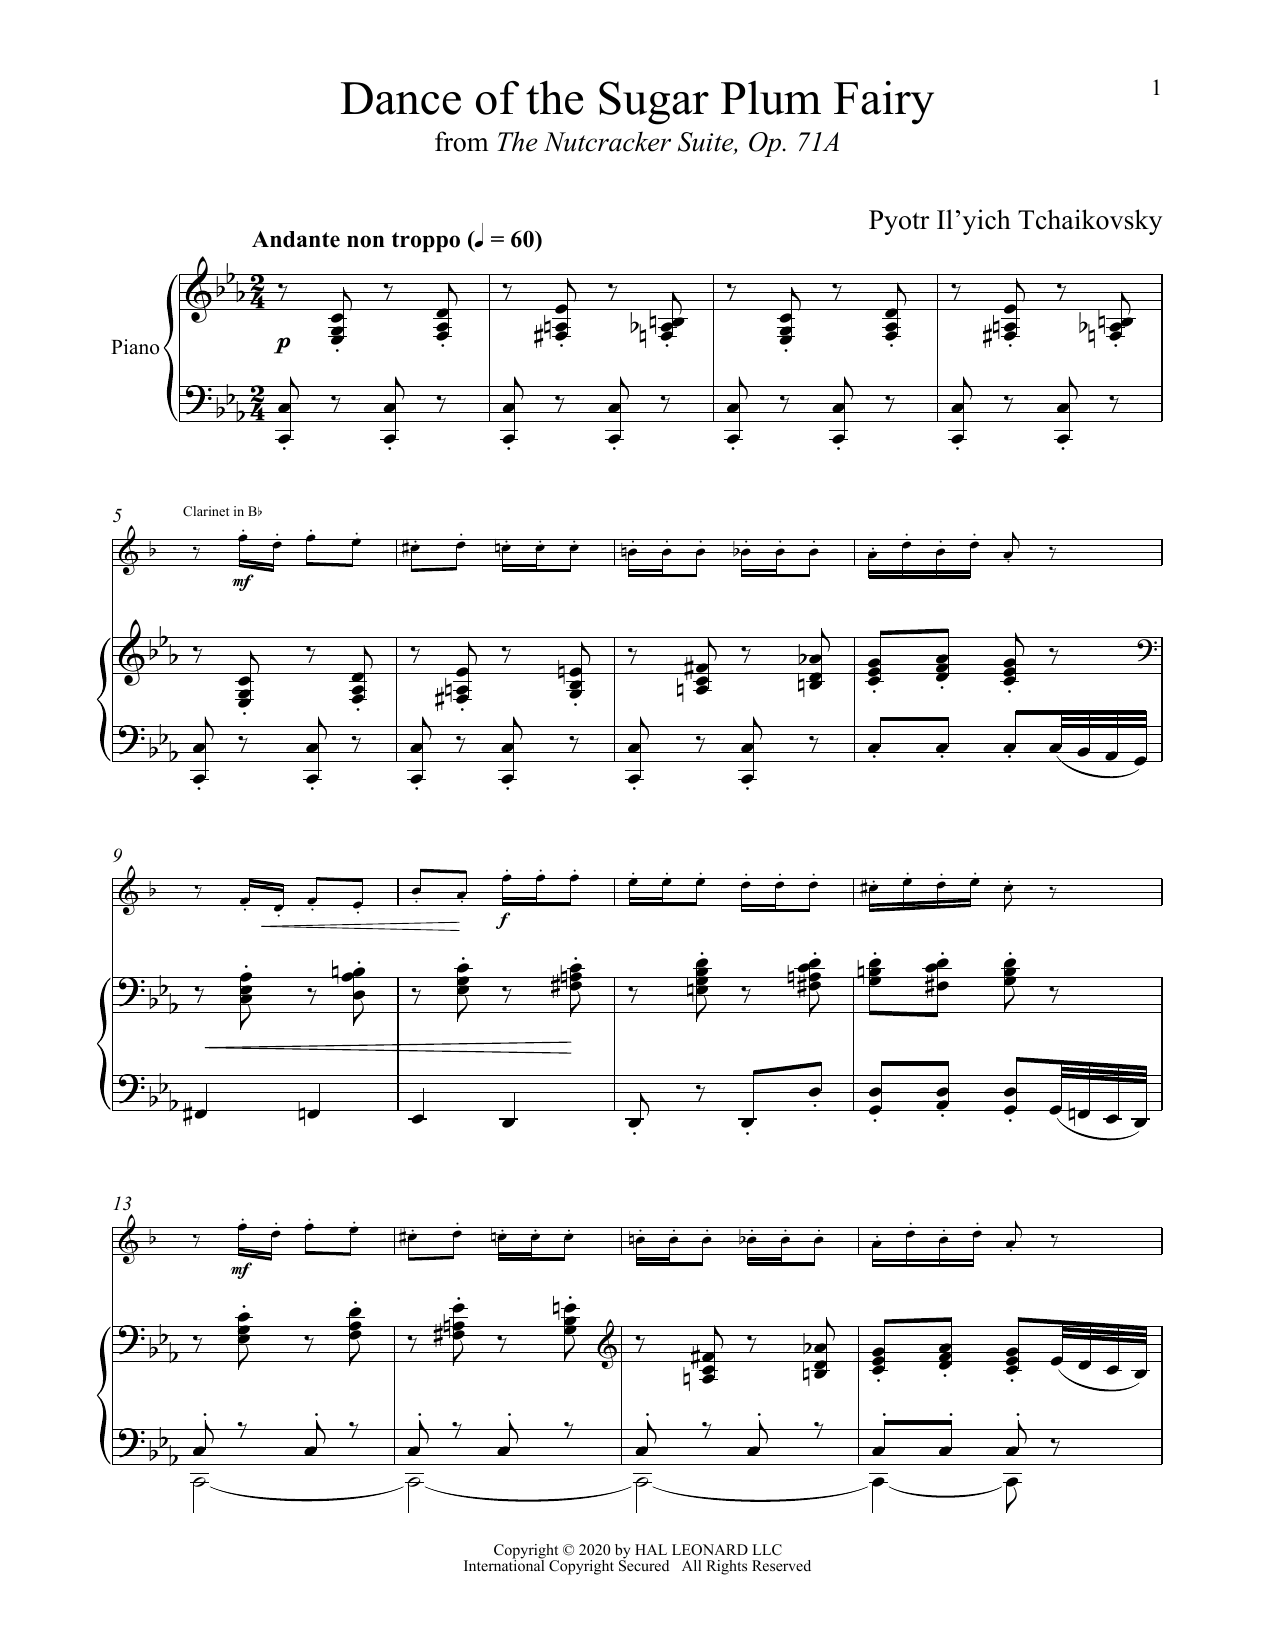 Download Pyotr Il'yich Tchaikovsky Dance Of The Sugar Plum Fairy, Op. 71a Sheet Music